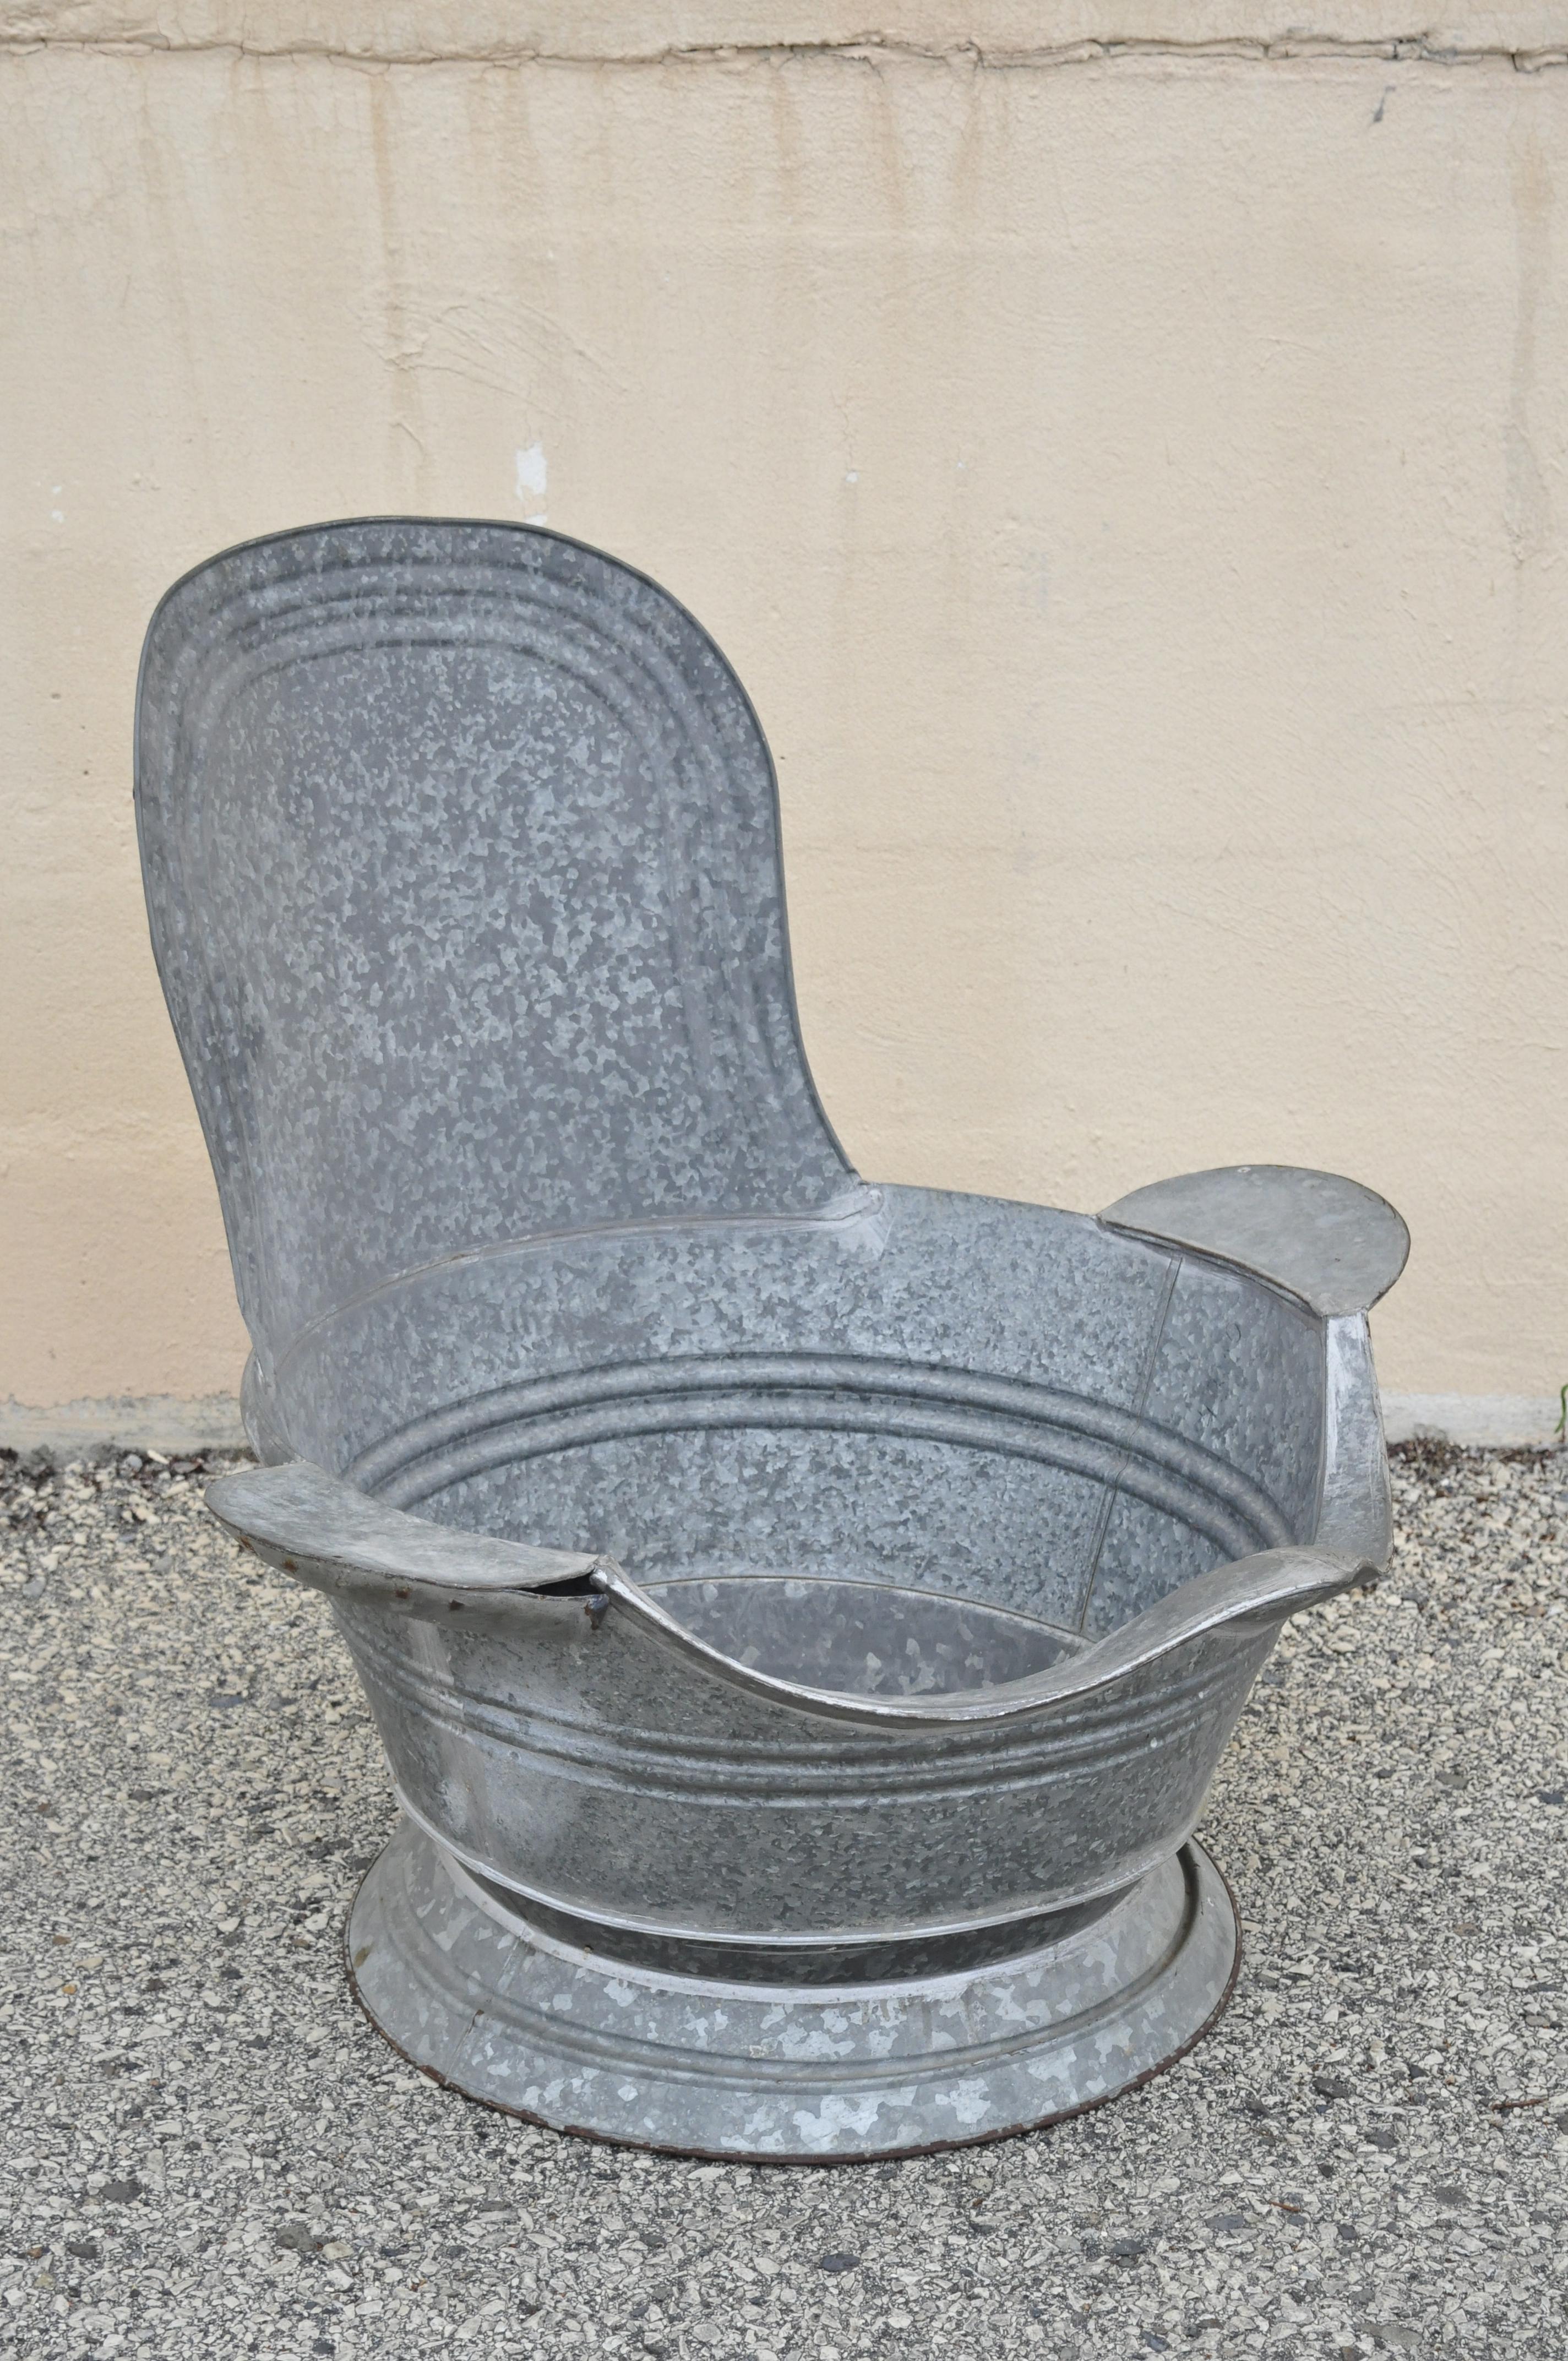 Antique galvanized metal tin cowboy bathtub sit down hip tub with back. Item is a very rare antique item. Circa late 19th - early 20th century. Measurements: 28